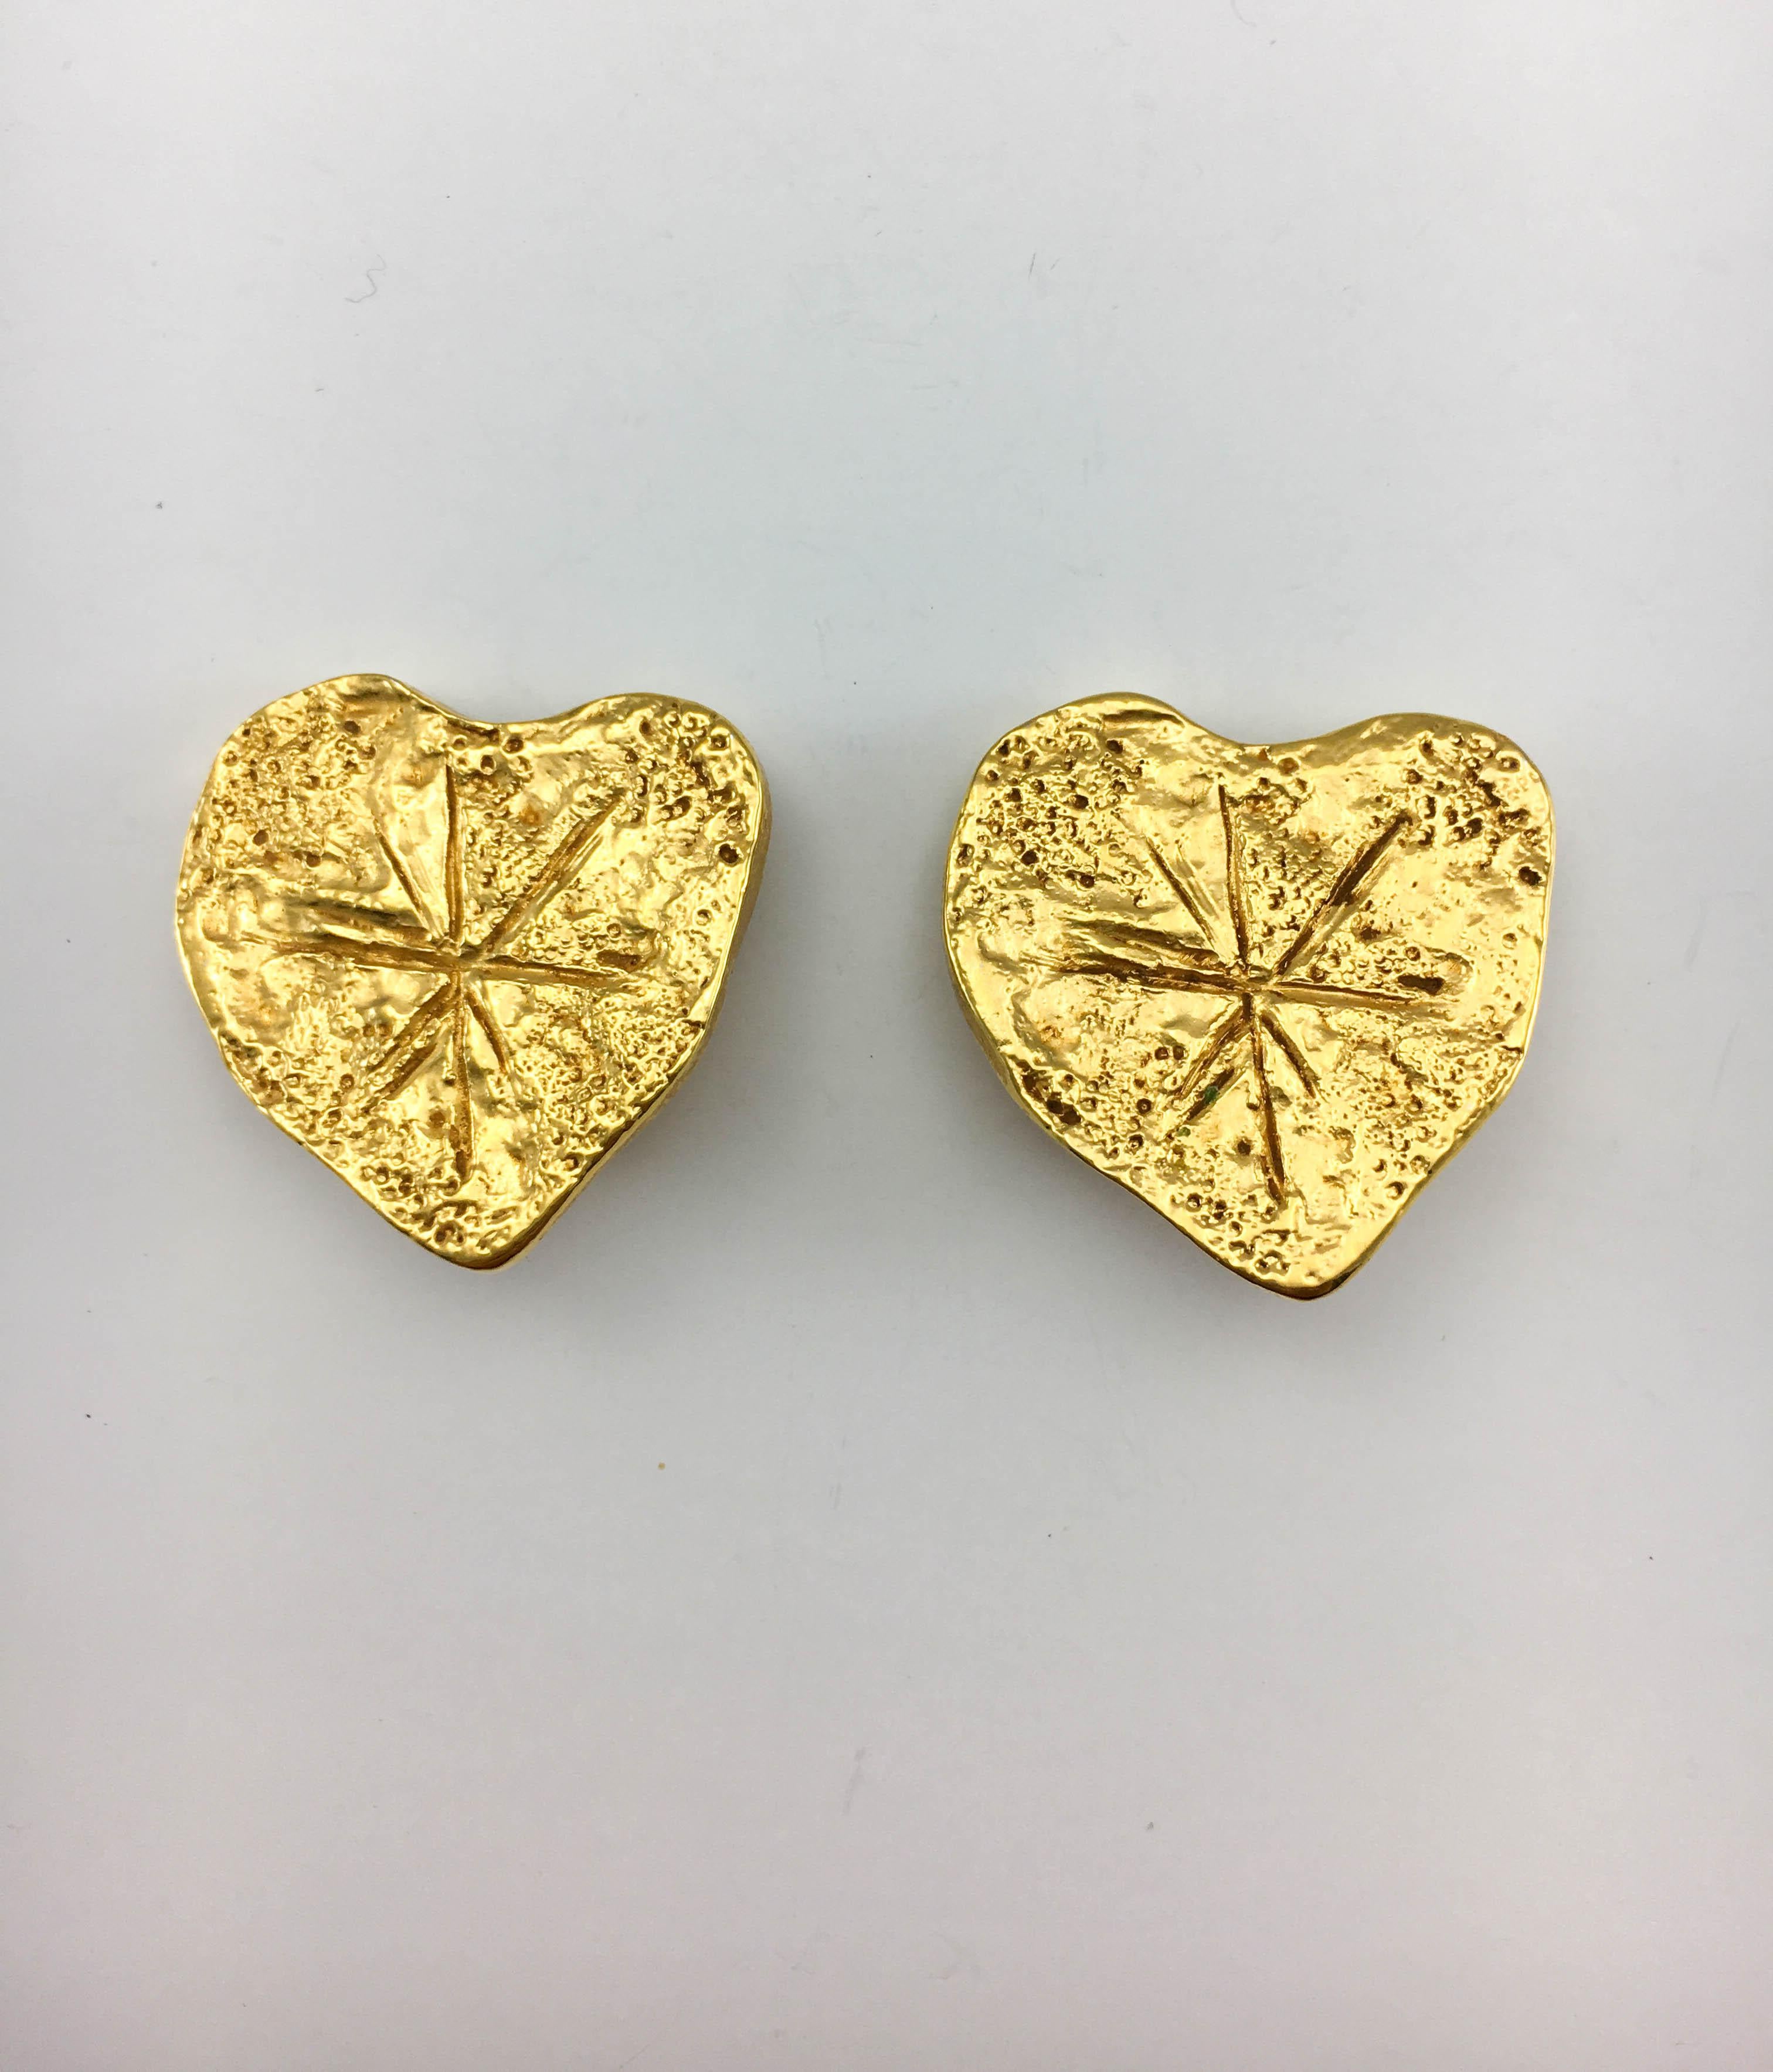 1994 Christian Lacroix Gold-Plated Modernist Heart Earrings In Excellent Condition For Sale In London, Chelsea